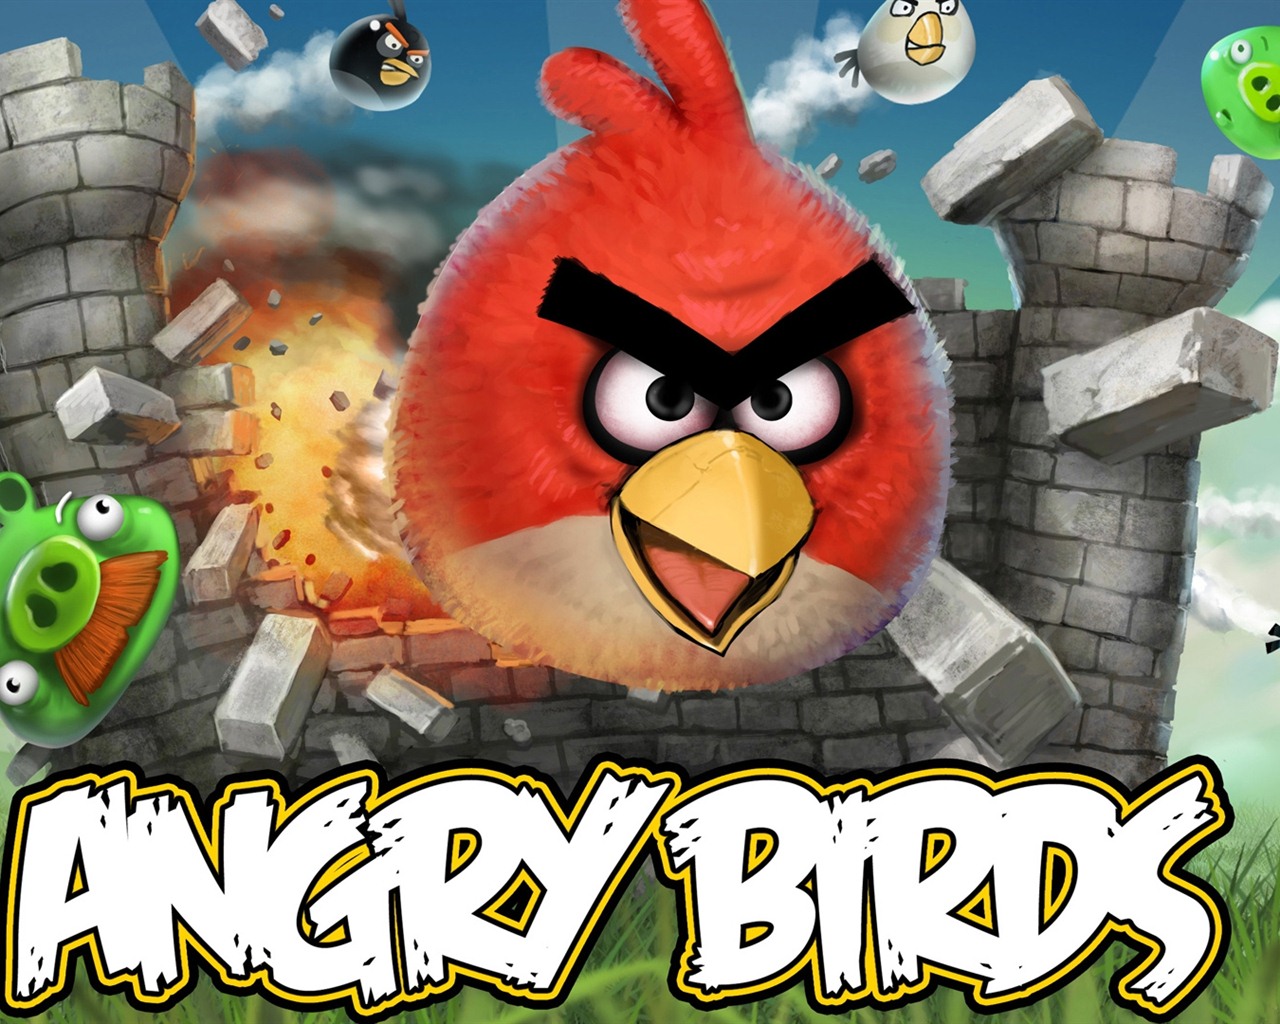 Angry Birds Game Wallpapers #15 - 1280x1024